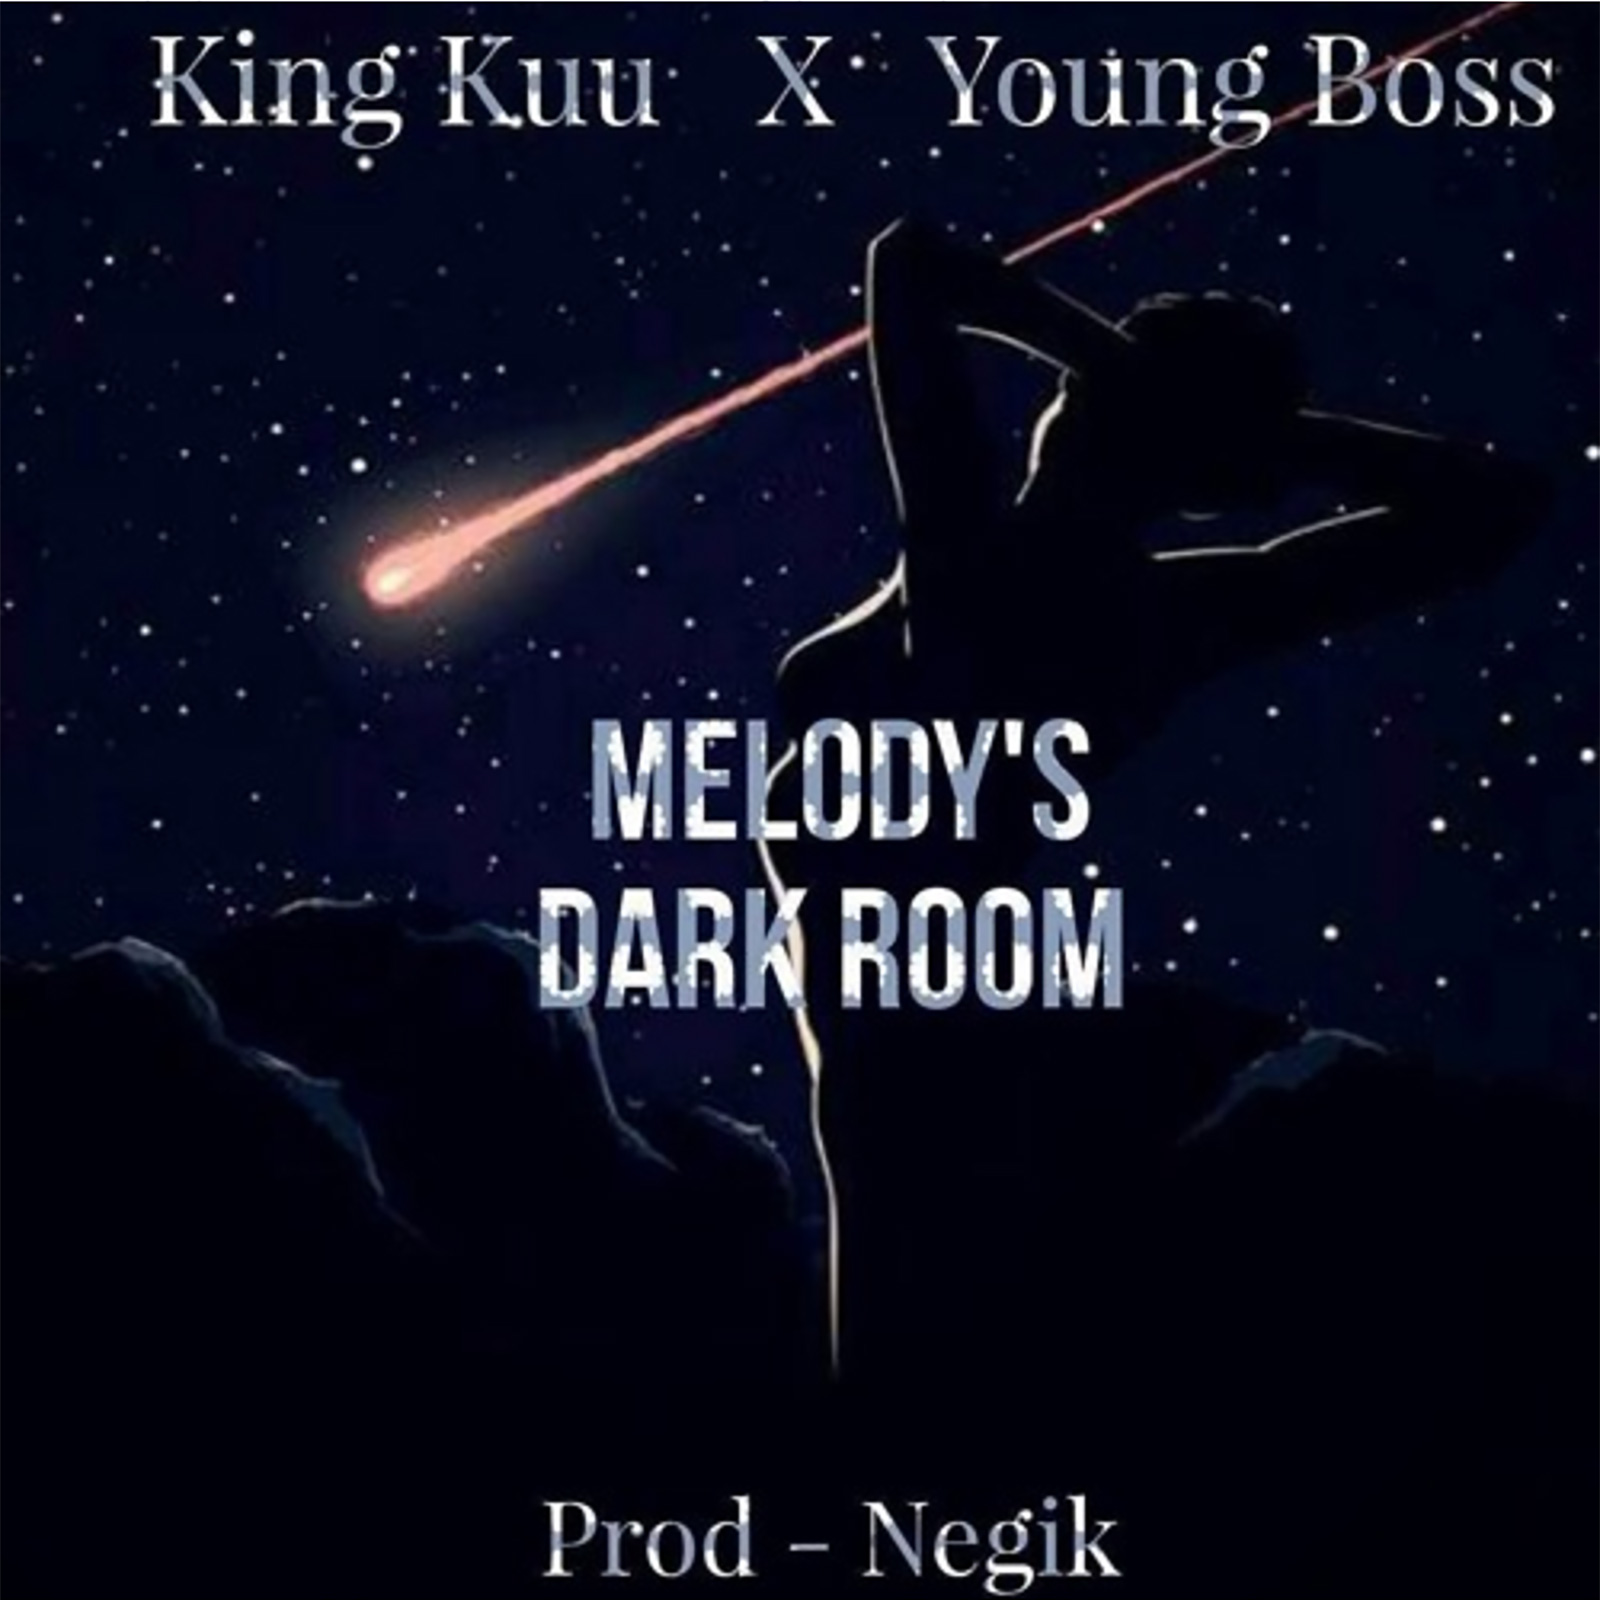 Melody's Dark Room by King Kuu feat. Young Boss